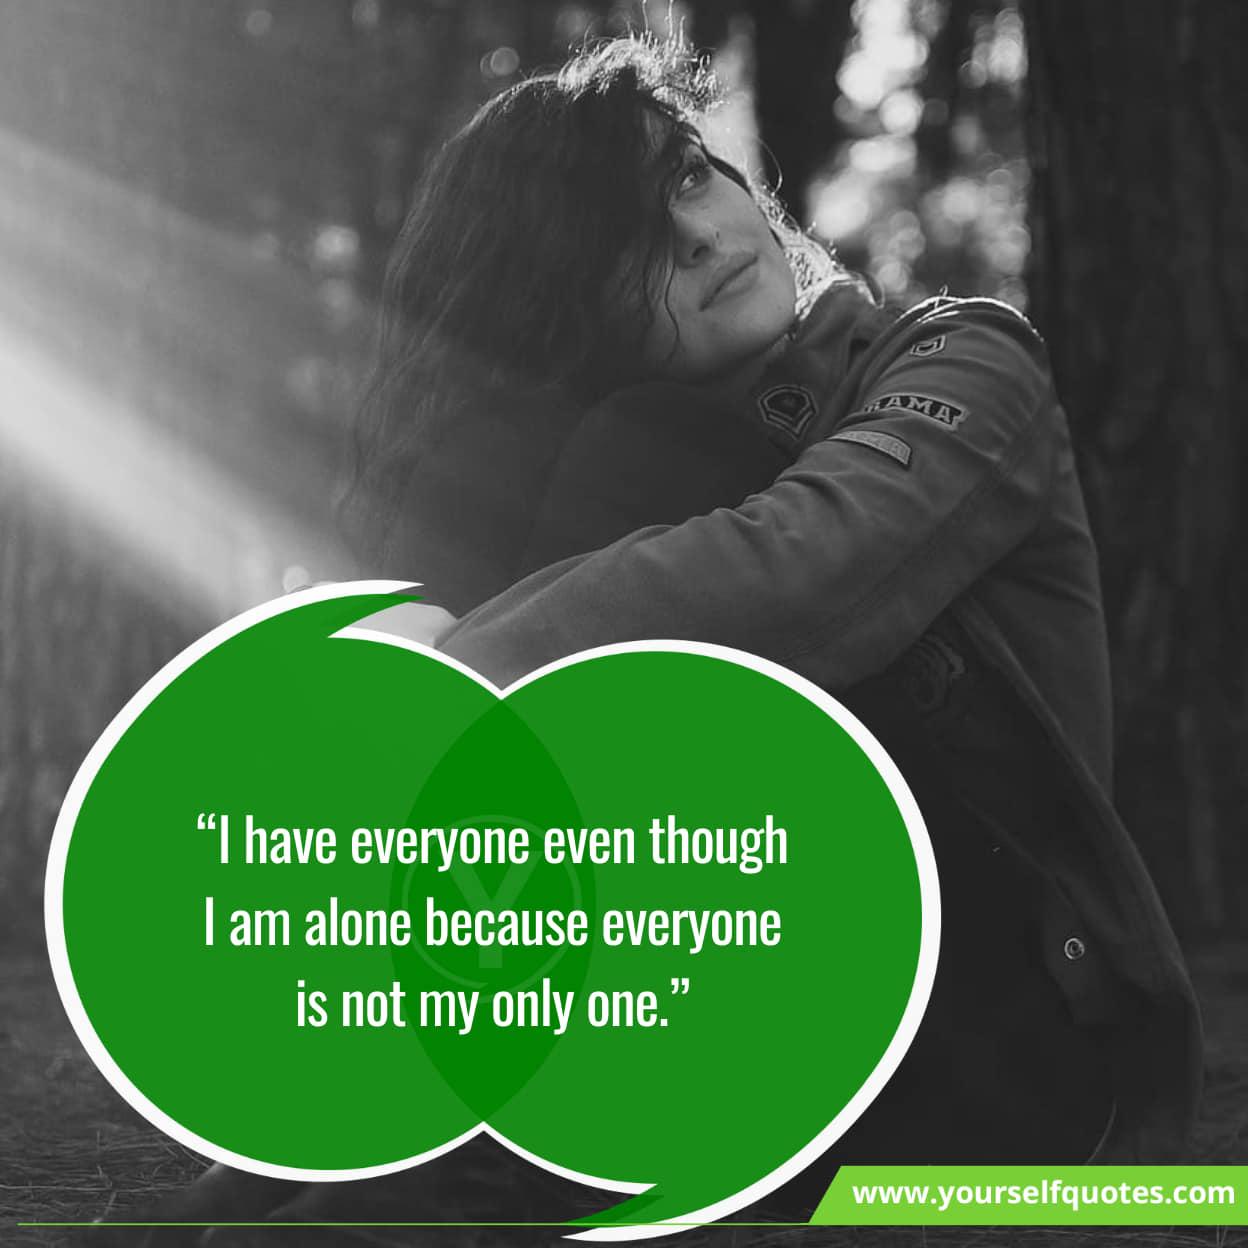 Quotes on the beauty of being alone